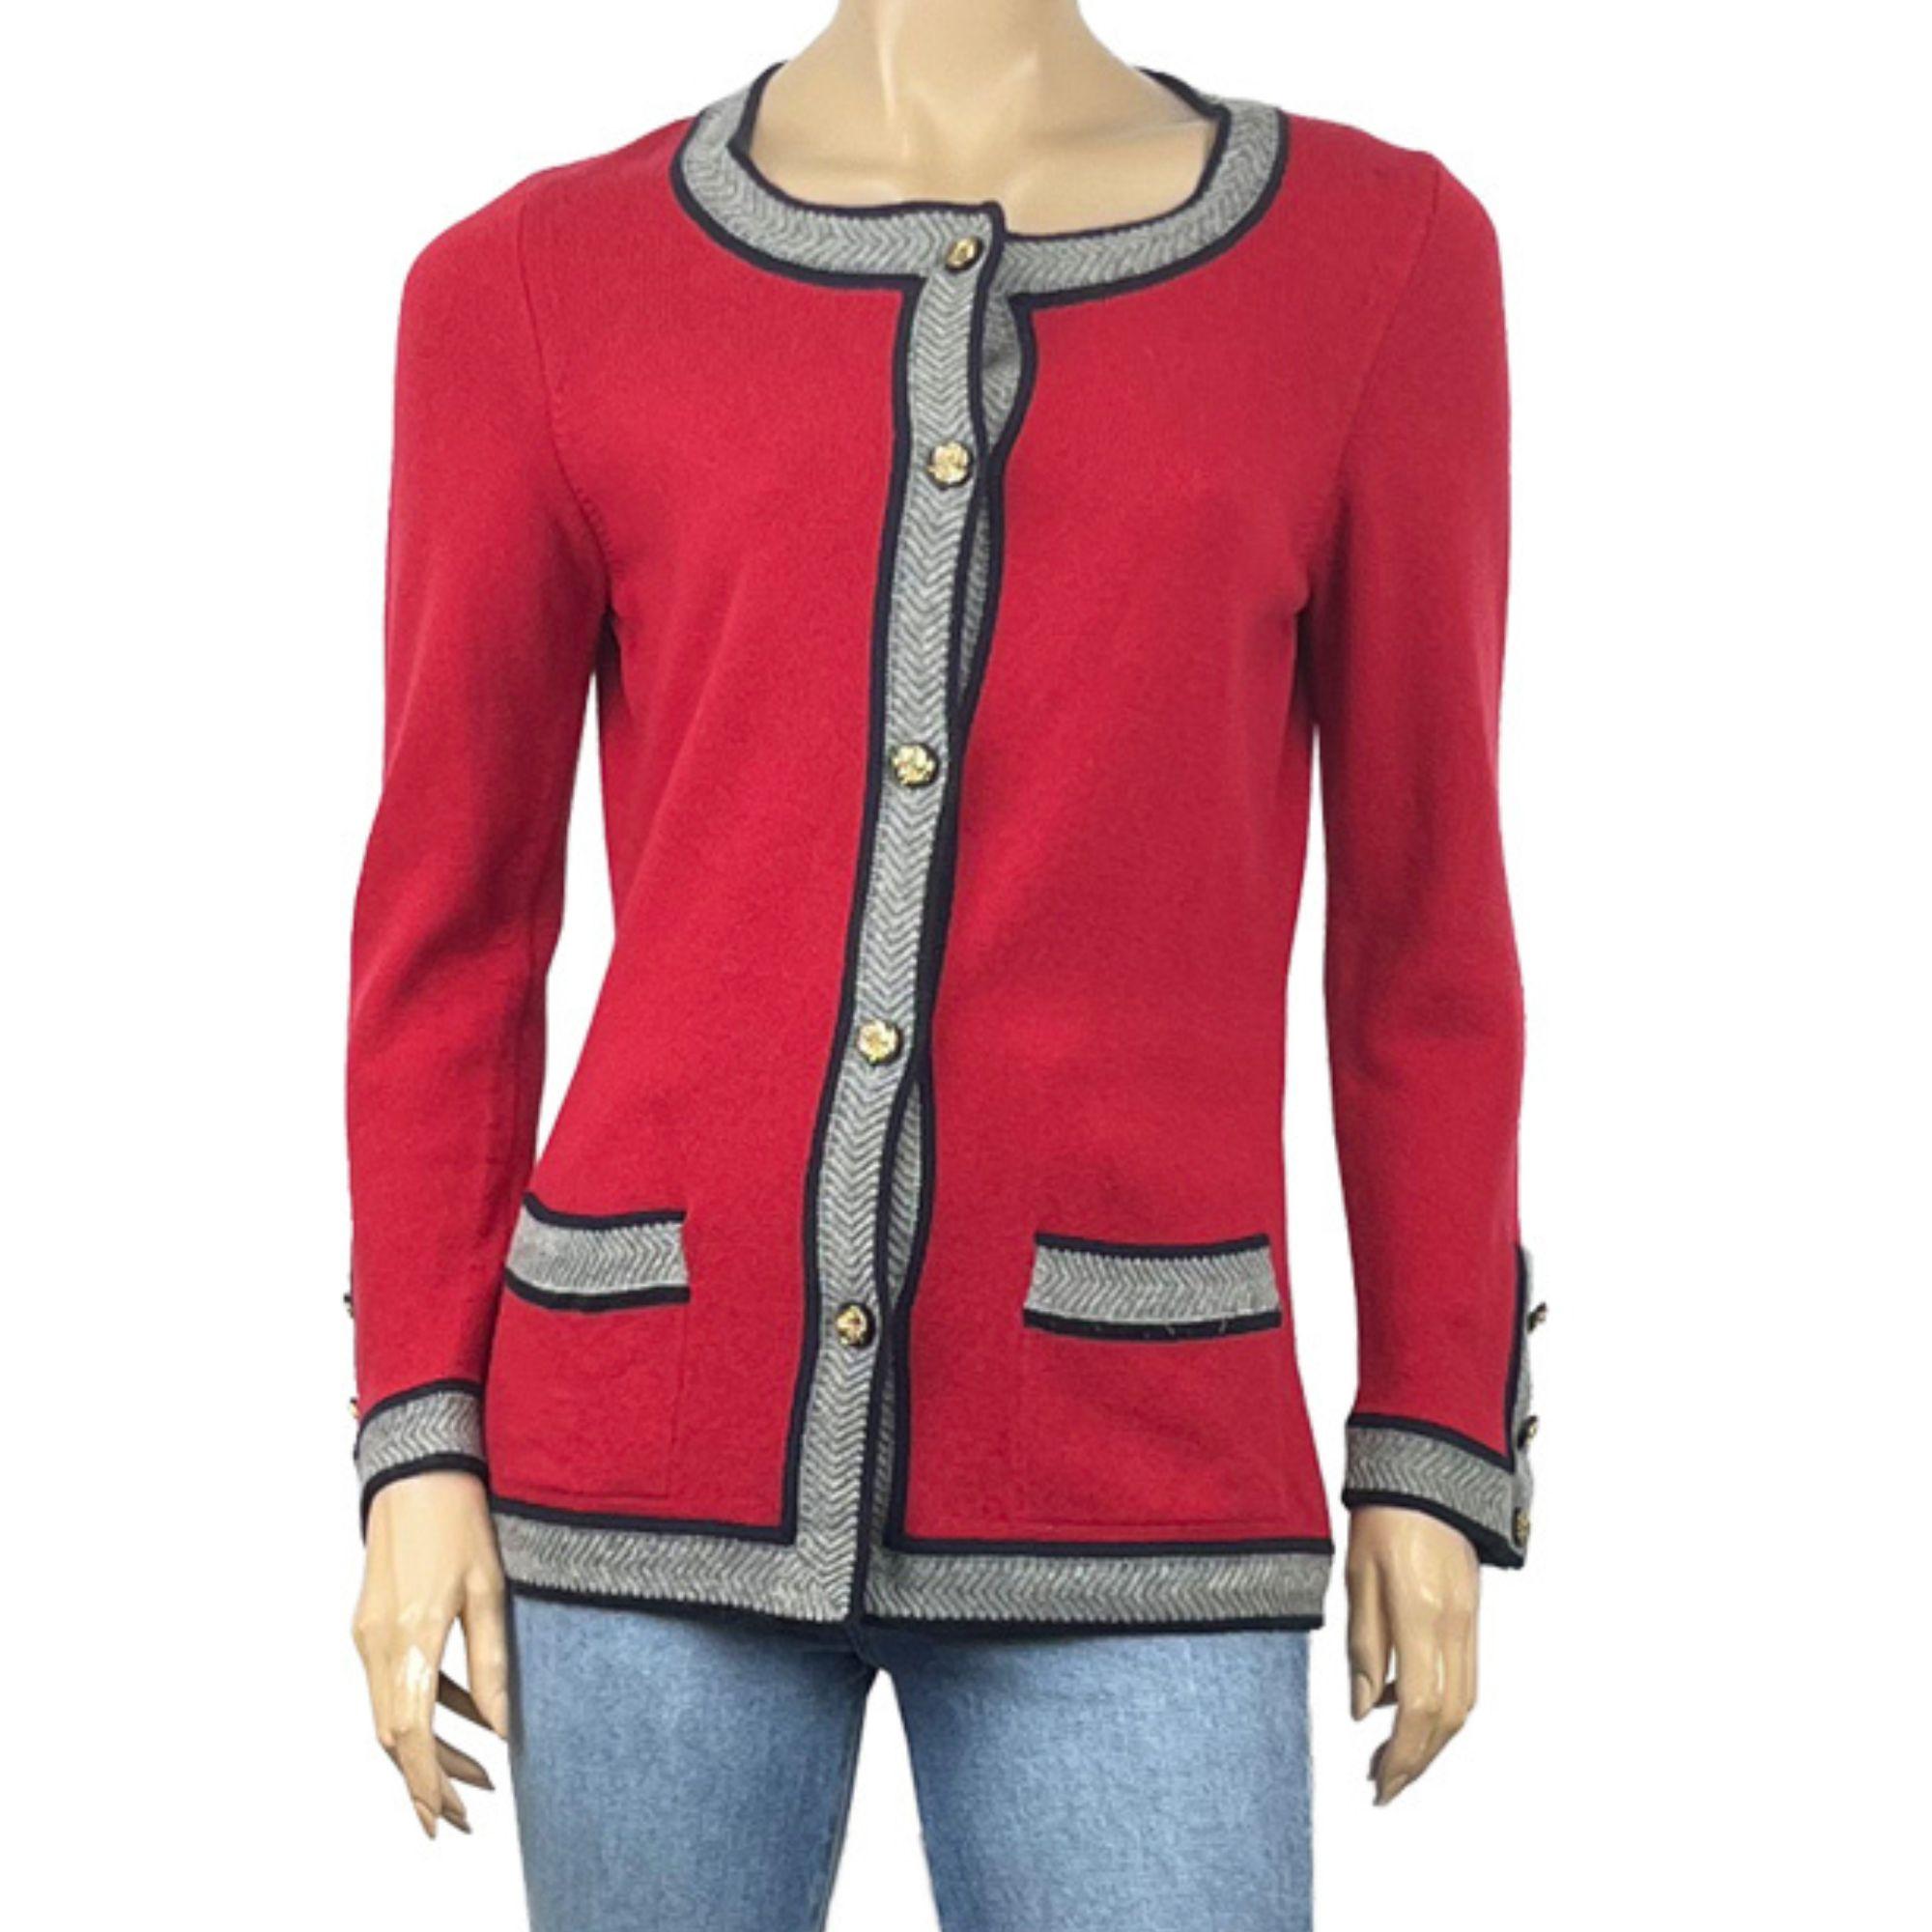 Chanel Red Cashmere Cardigan w/ Grey Trim-36. Chanel cardigan is in excellent condition. There is no sign of use. Made of 100% cashmere. There are gold button details on the pockets, sleeves, and down the front

Size: EU 36